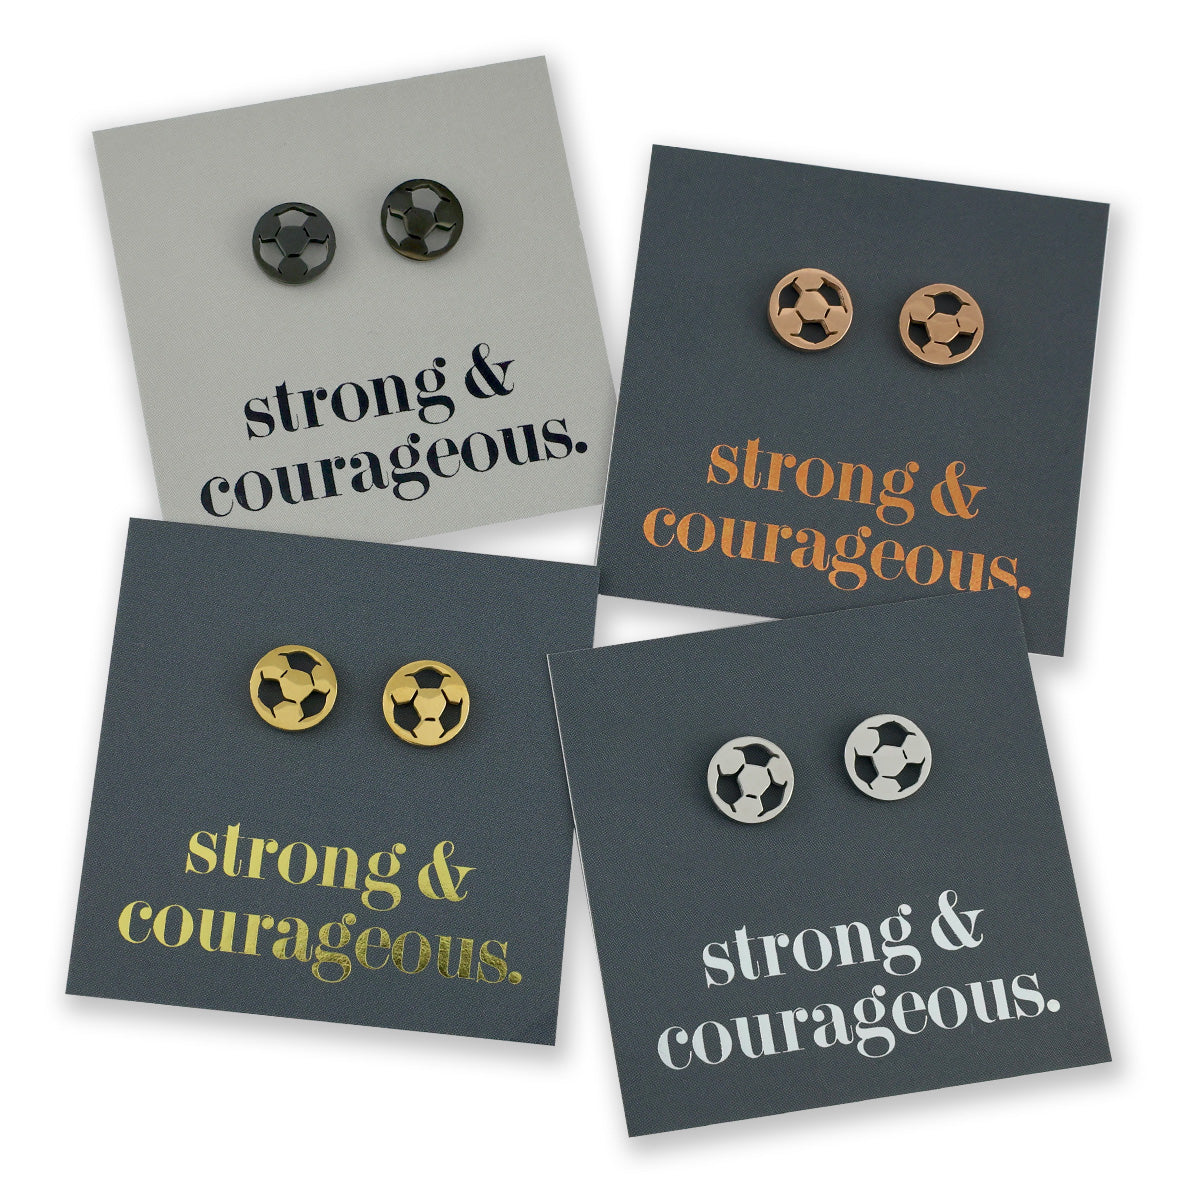 Stainless steel hypoallergenic soccer foorball stud earring, presented on a foil card that says strong and courageous. 